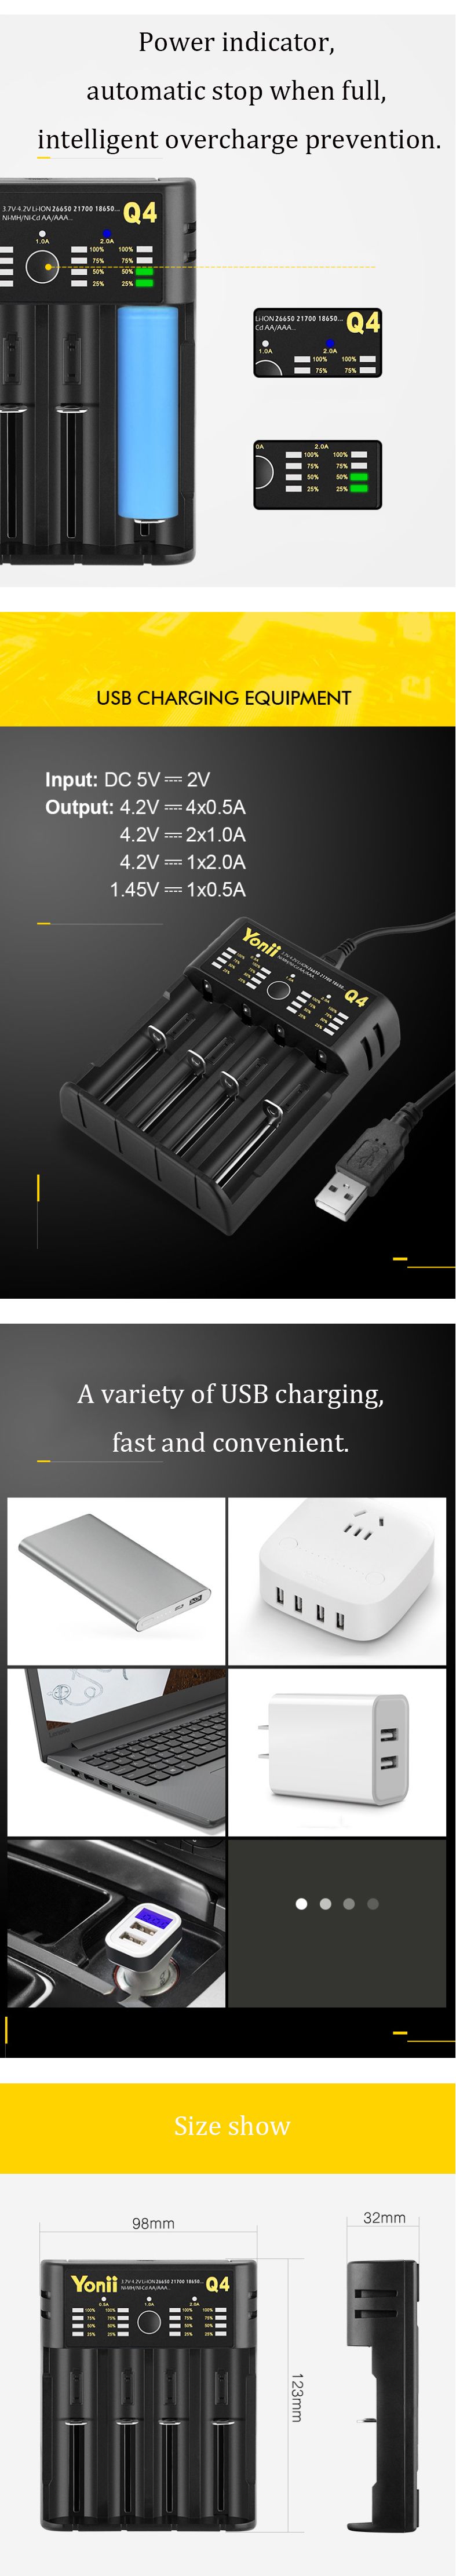 Yonii-Q4-Four-Slot-USB-Rechargeable-Lithium-Battery-Charger-Multi-functional-Intelligent-Charger-for-1552014